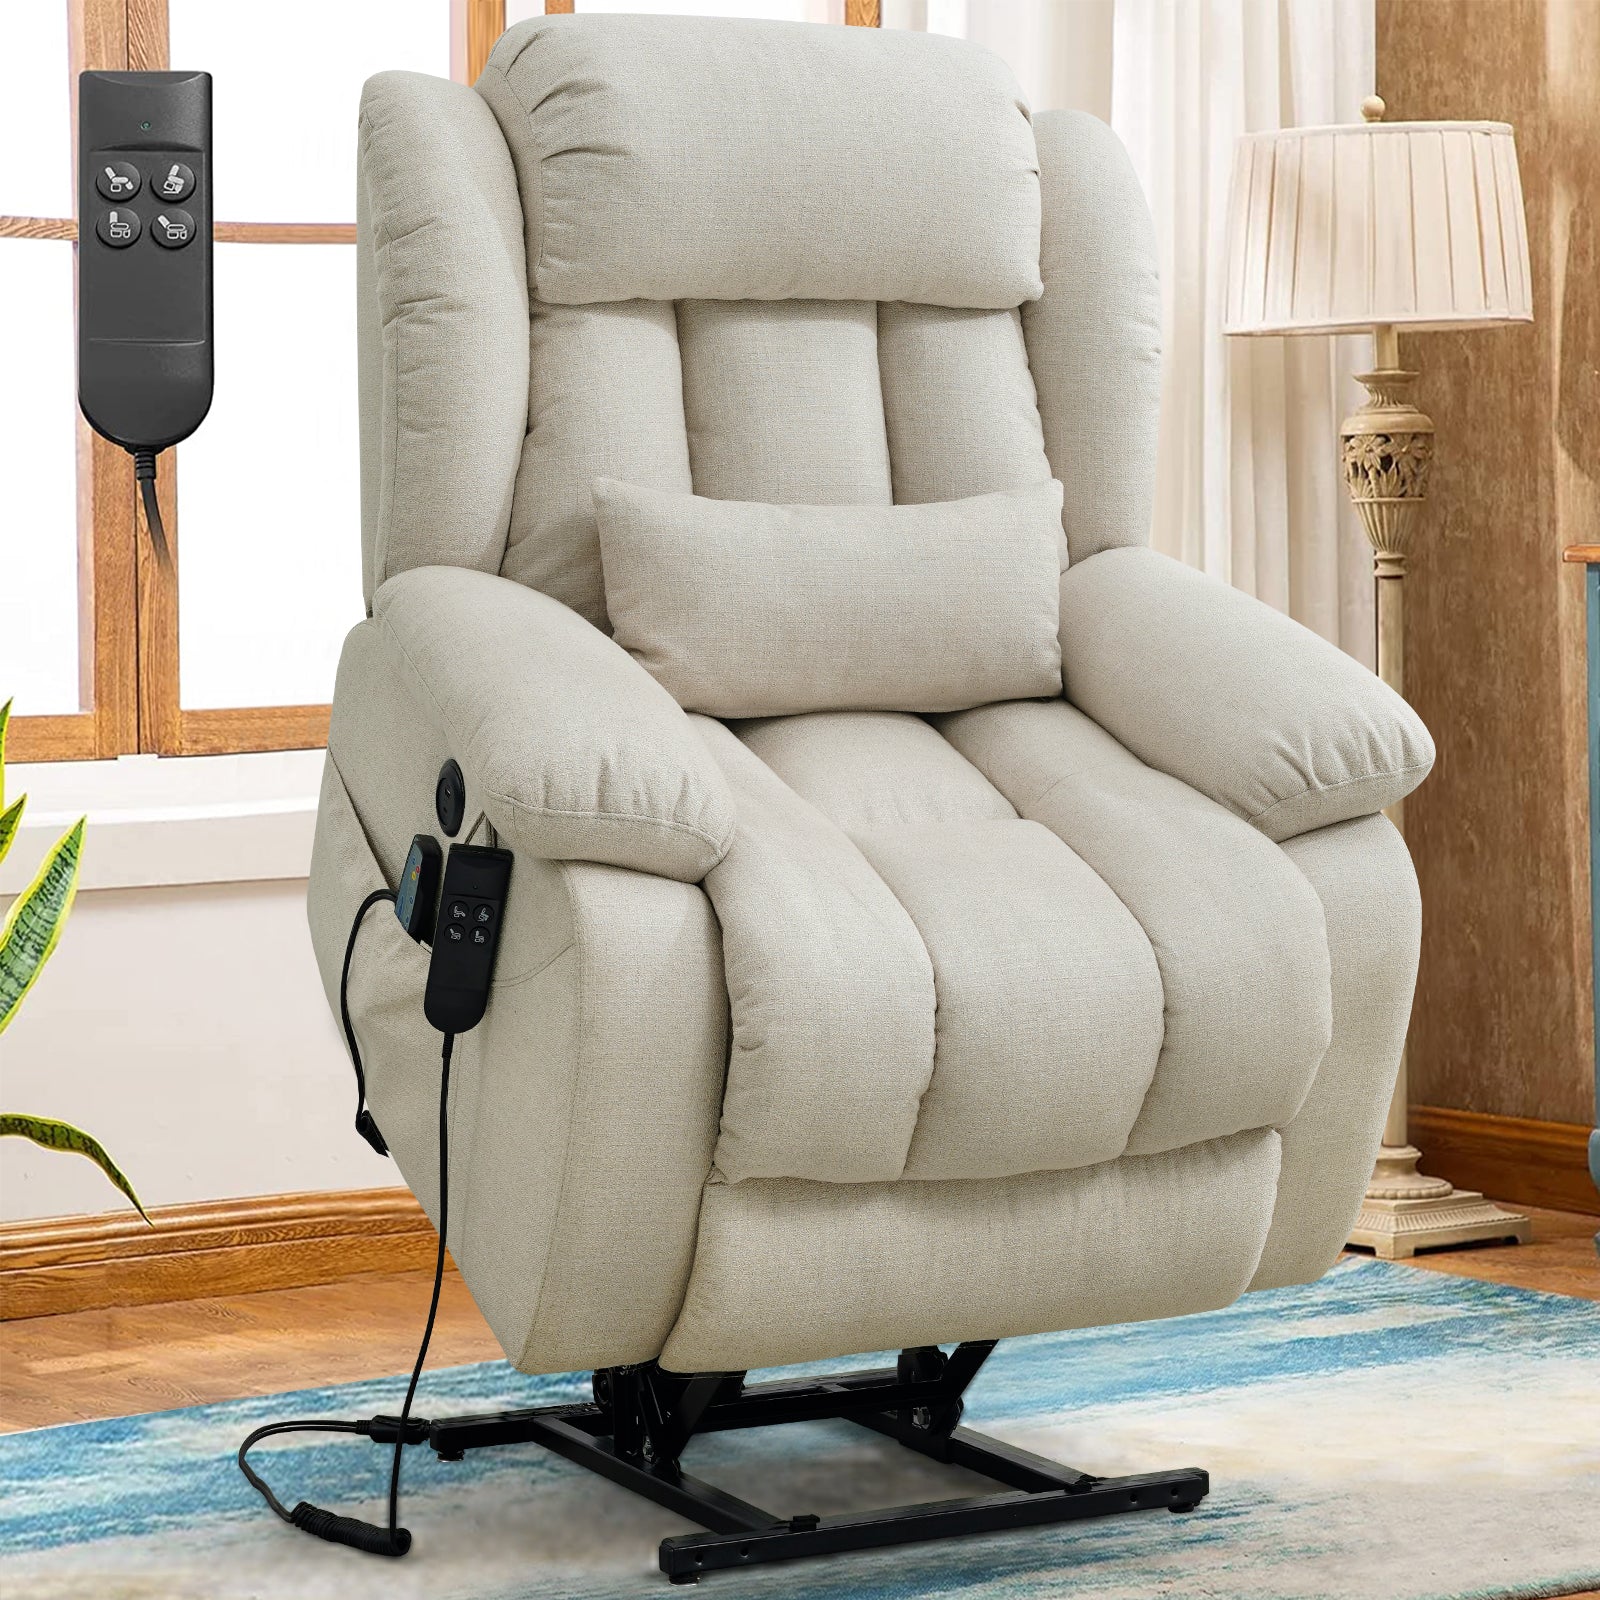 Dual Motor Power Lift Recliner Chair with Heat and Massage